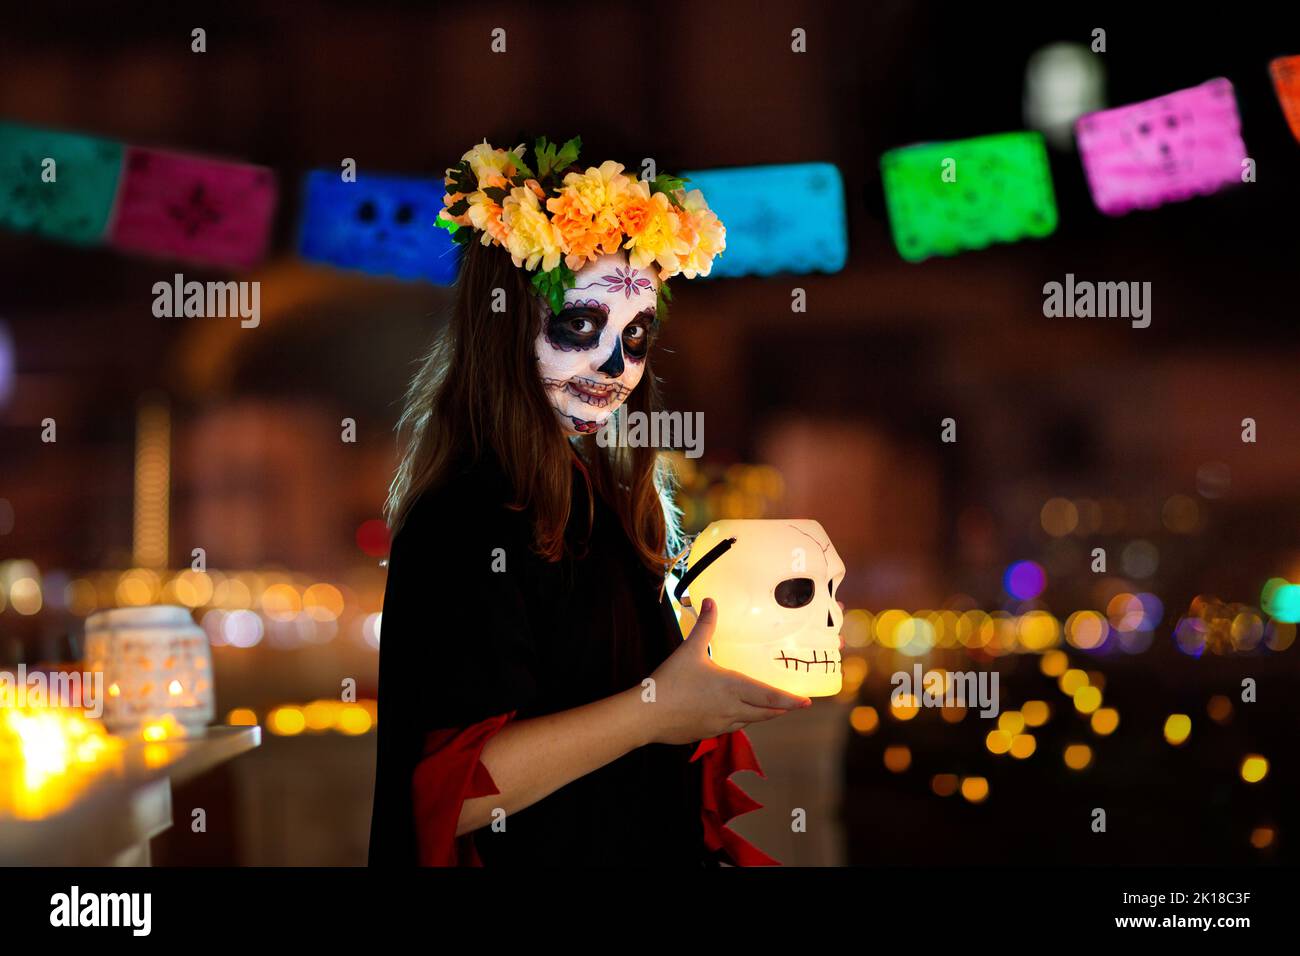 Dia de los muertos celebration. Traditional Day of the Dead party. Halloween in Mexico. Mexican girl in traditional make up and Catrina costume Stock Photo